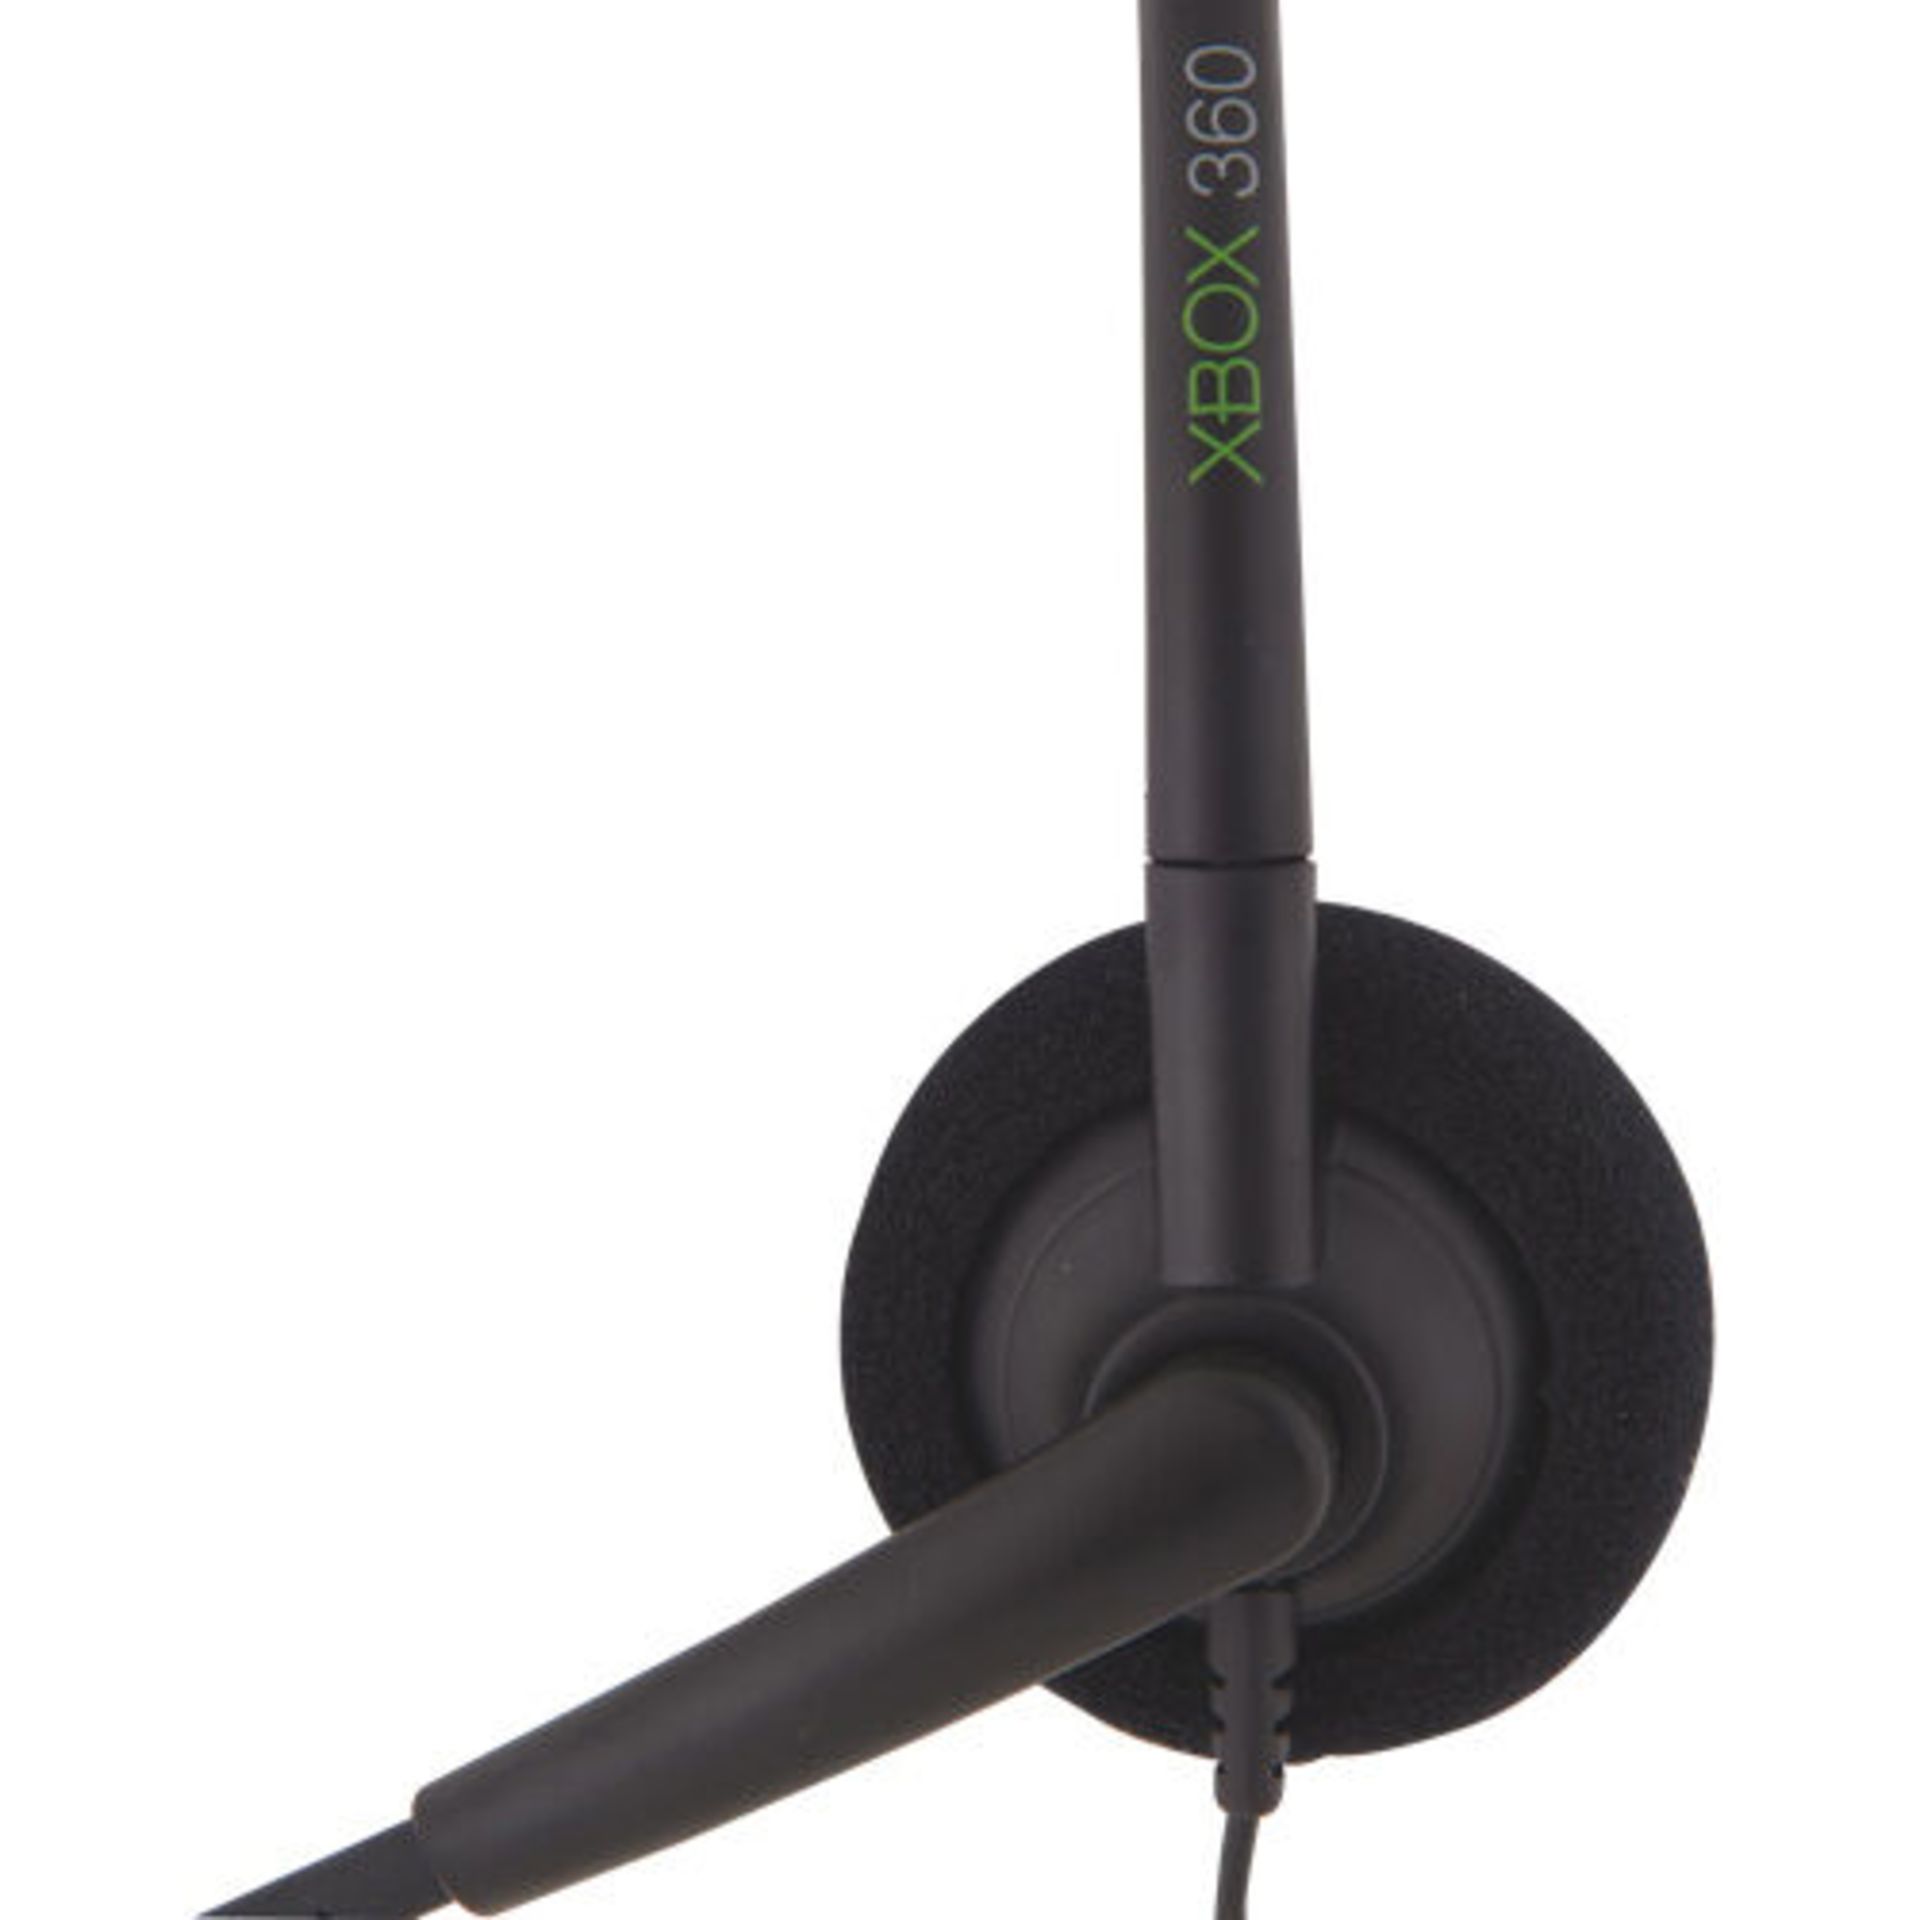 500 X OFFICIAL XBOX 360 NEW LIVE ONLINE CHAT HEADSET WITH MIC GAMING HEADPHONES 2.5MM AUX - Image 4 of 5